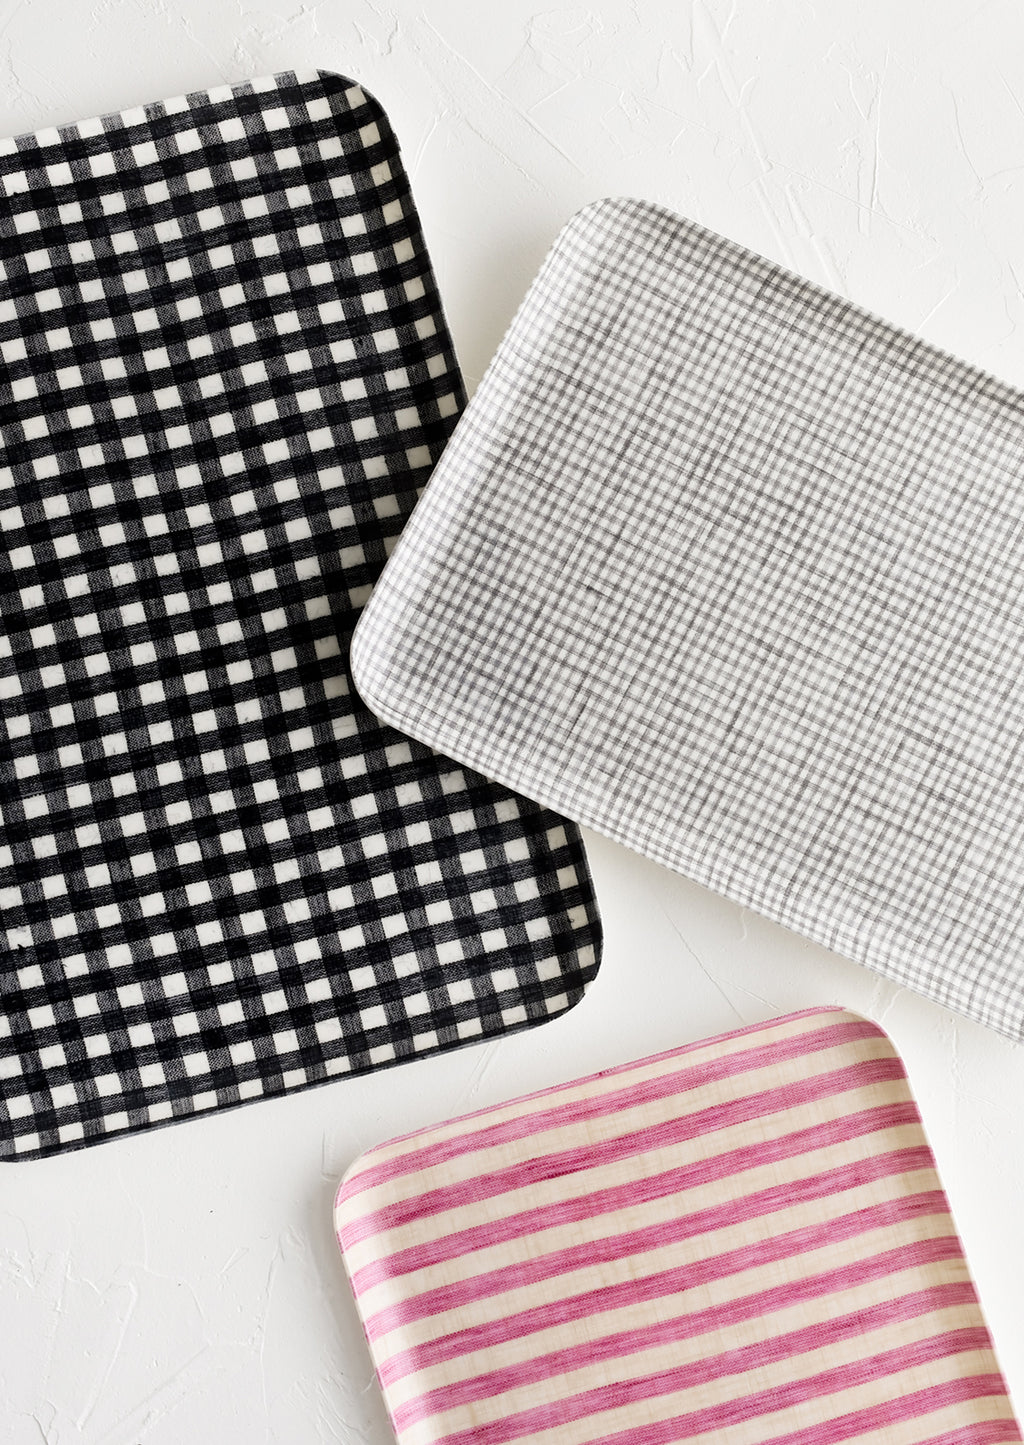 1: Patterned linen trays in assorted sizes and colors.